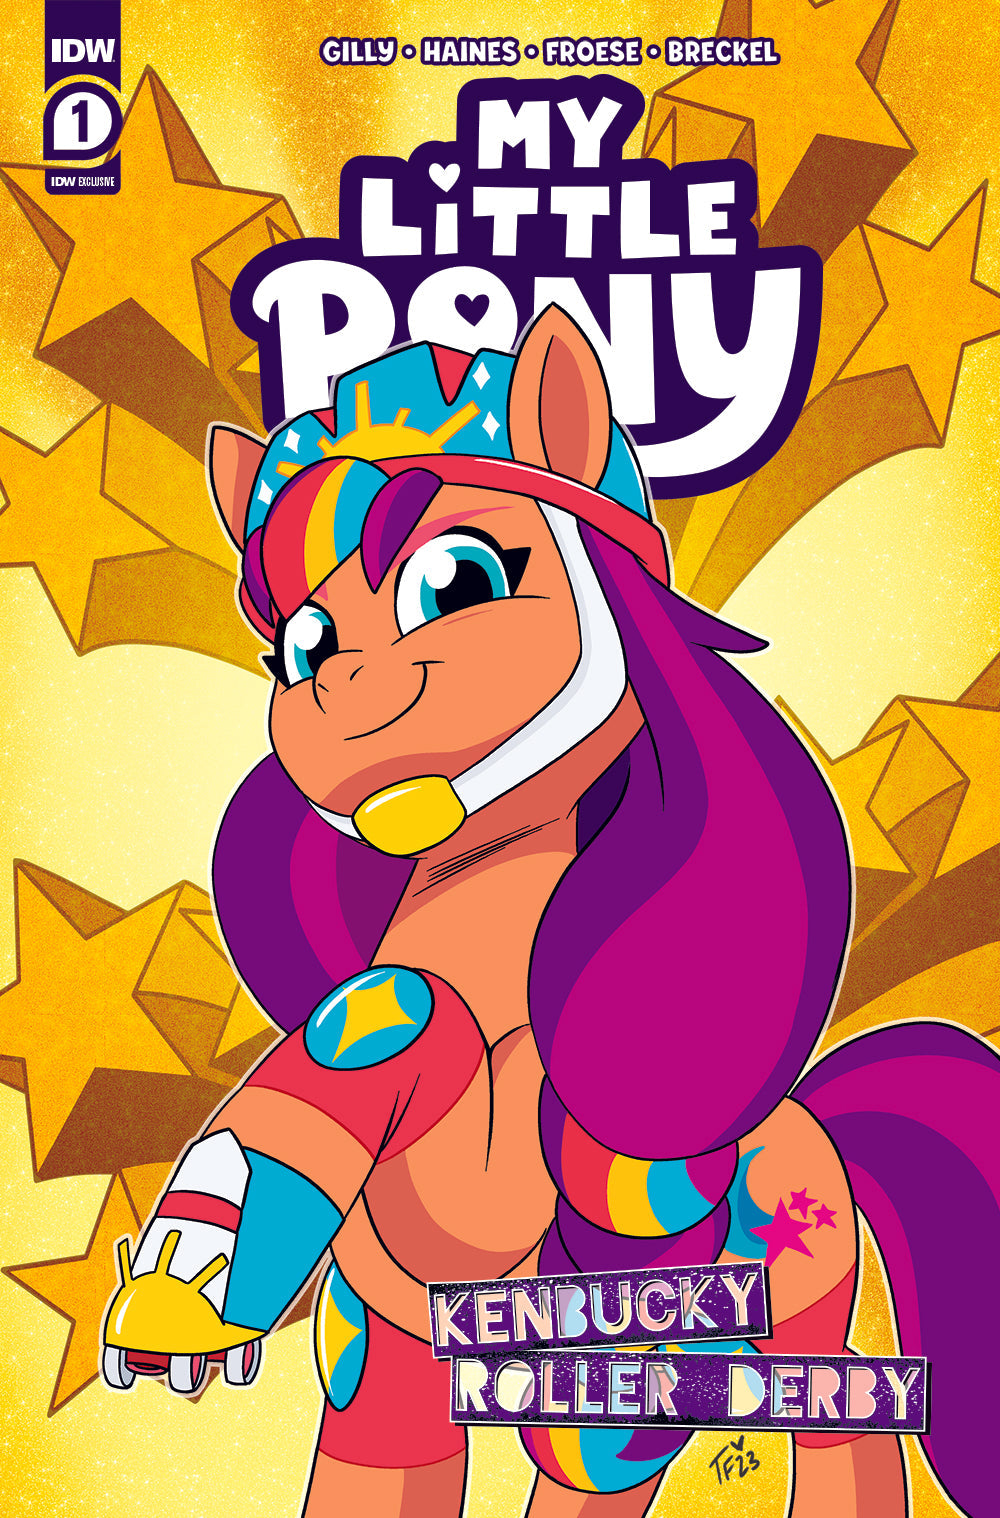 My Little Pony: Kenbucky Roller Derby #1 - IDW Exclusive